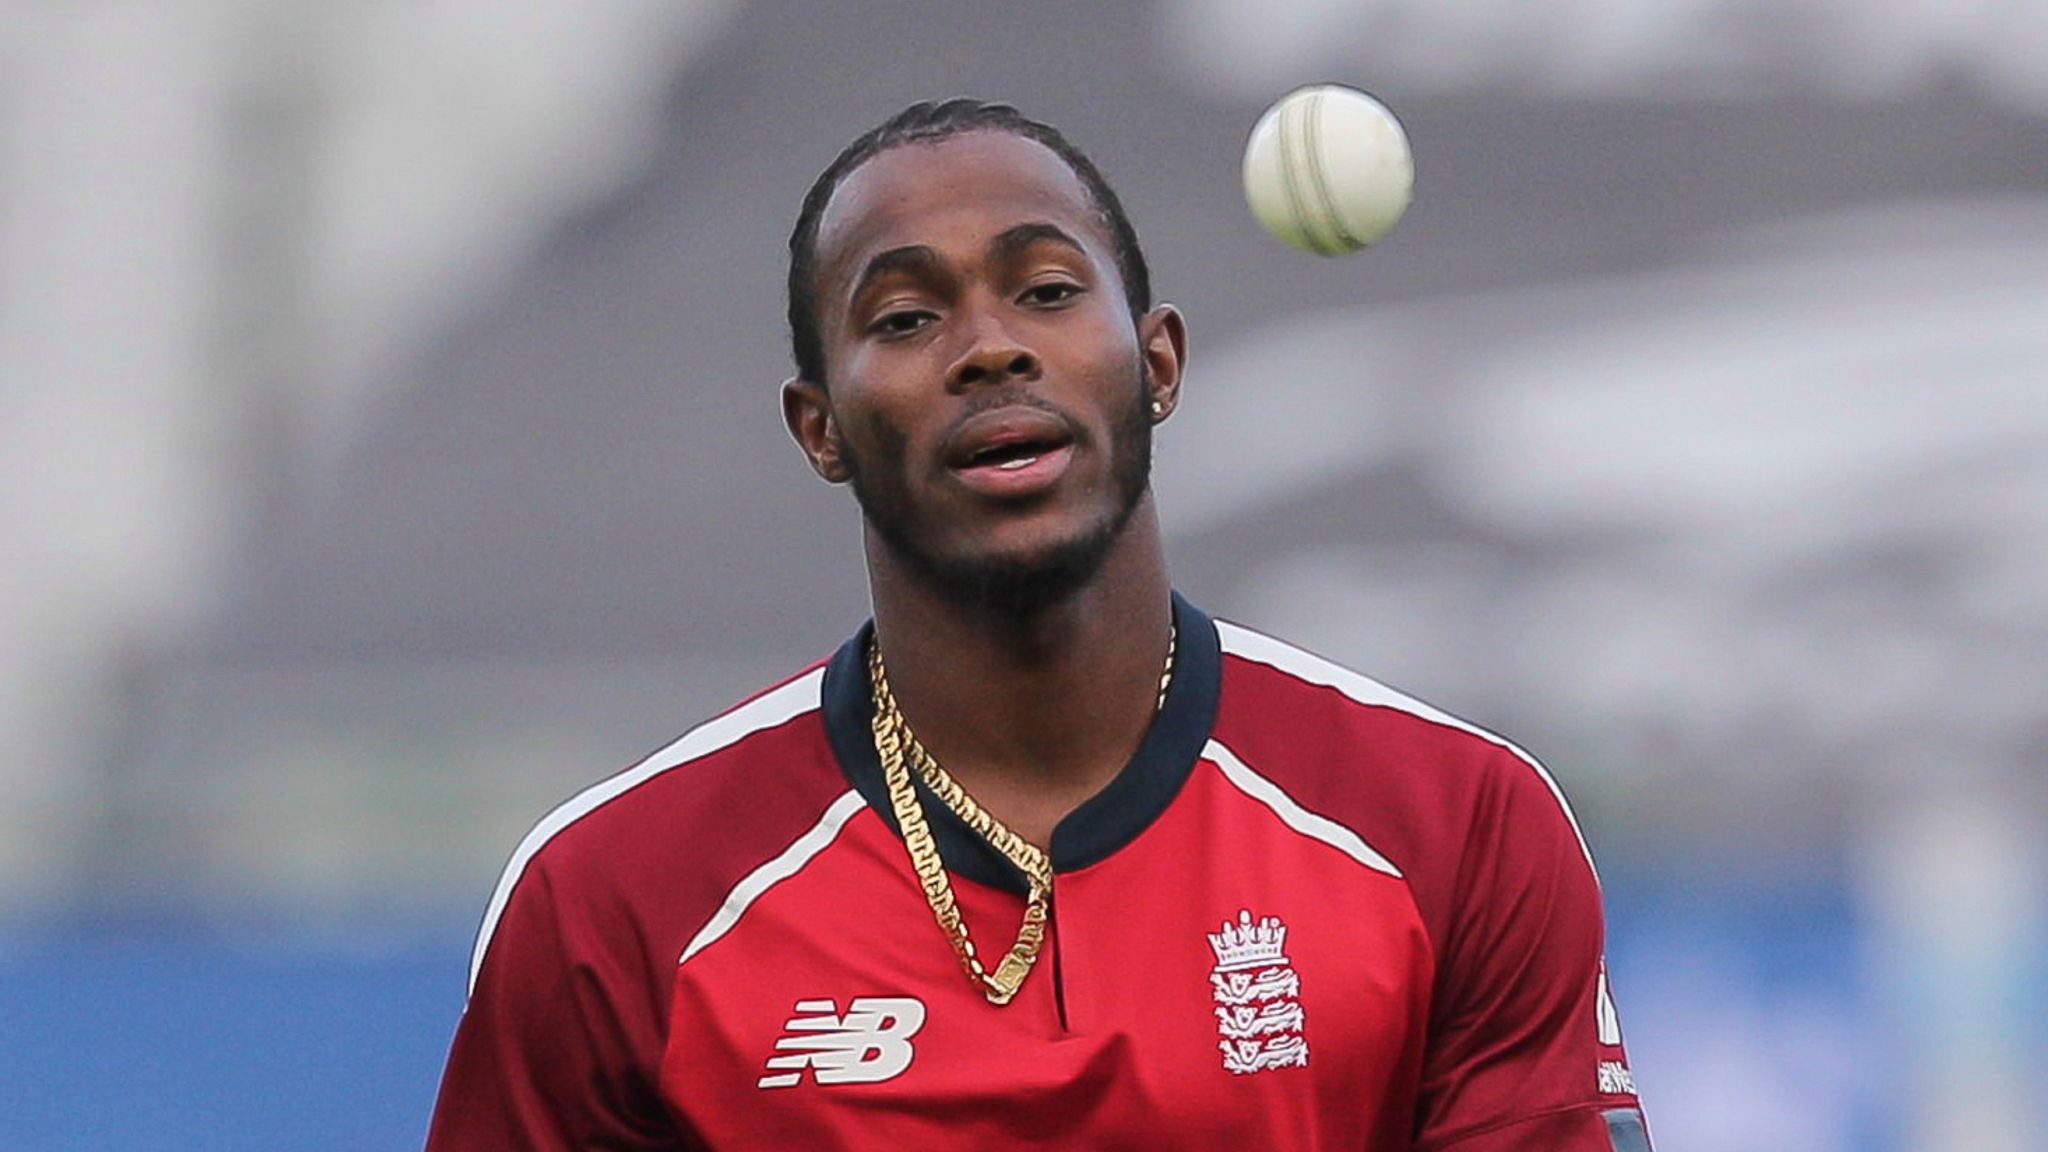 England fast bowler Jofra Archer to resume training but no decision yet on when he returns to playing | Cricket News | Sky Sports